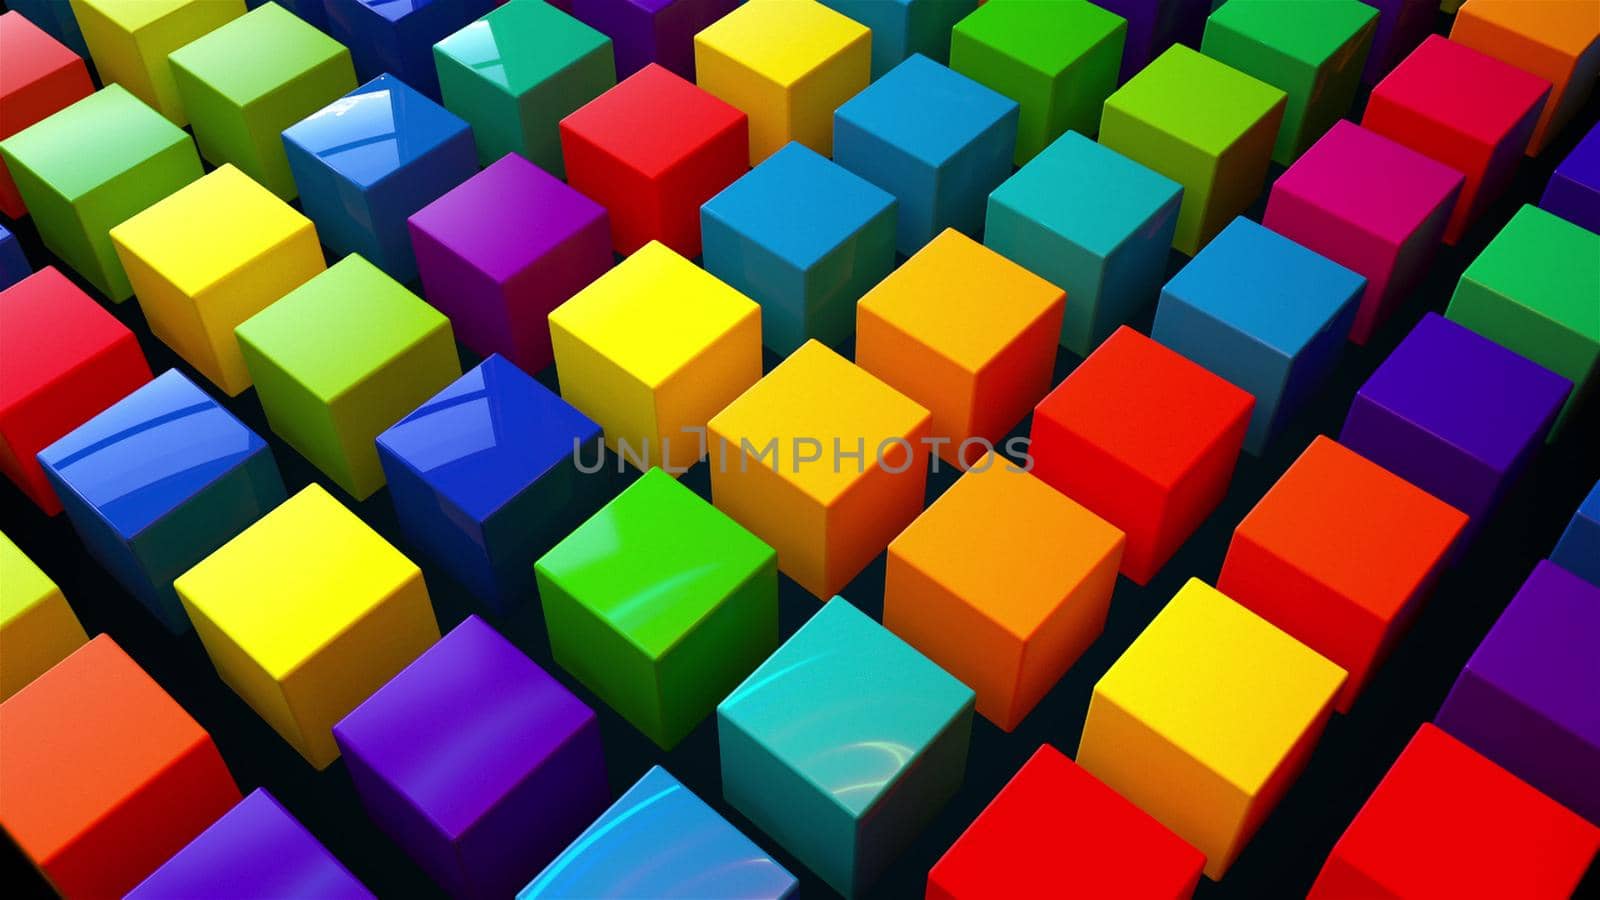 Fields of random colored cubes by nolimit046